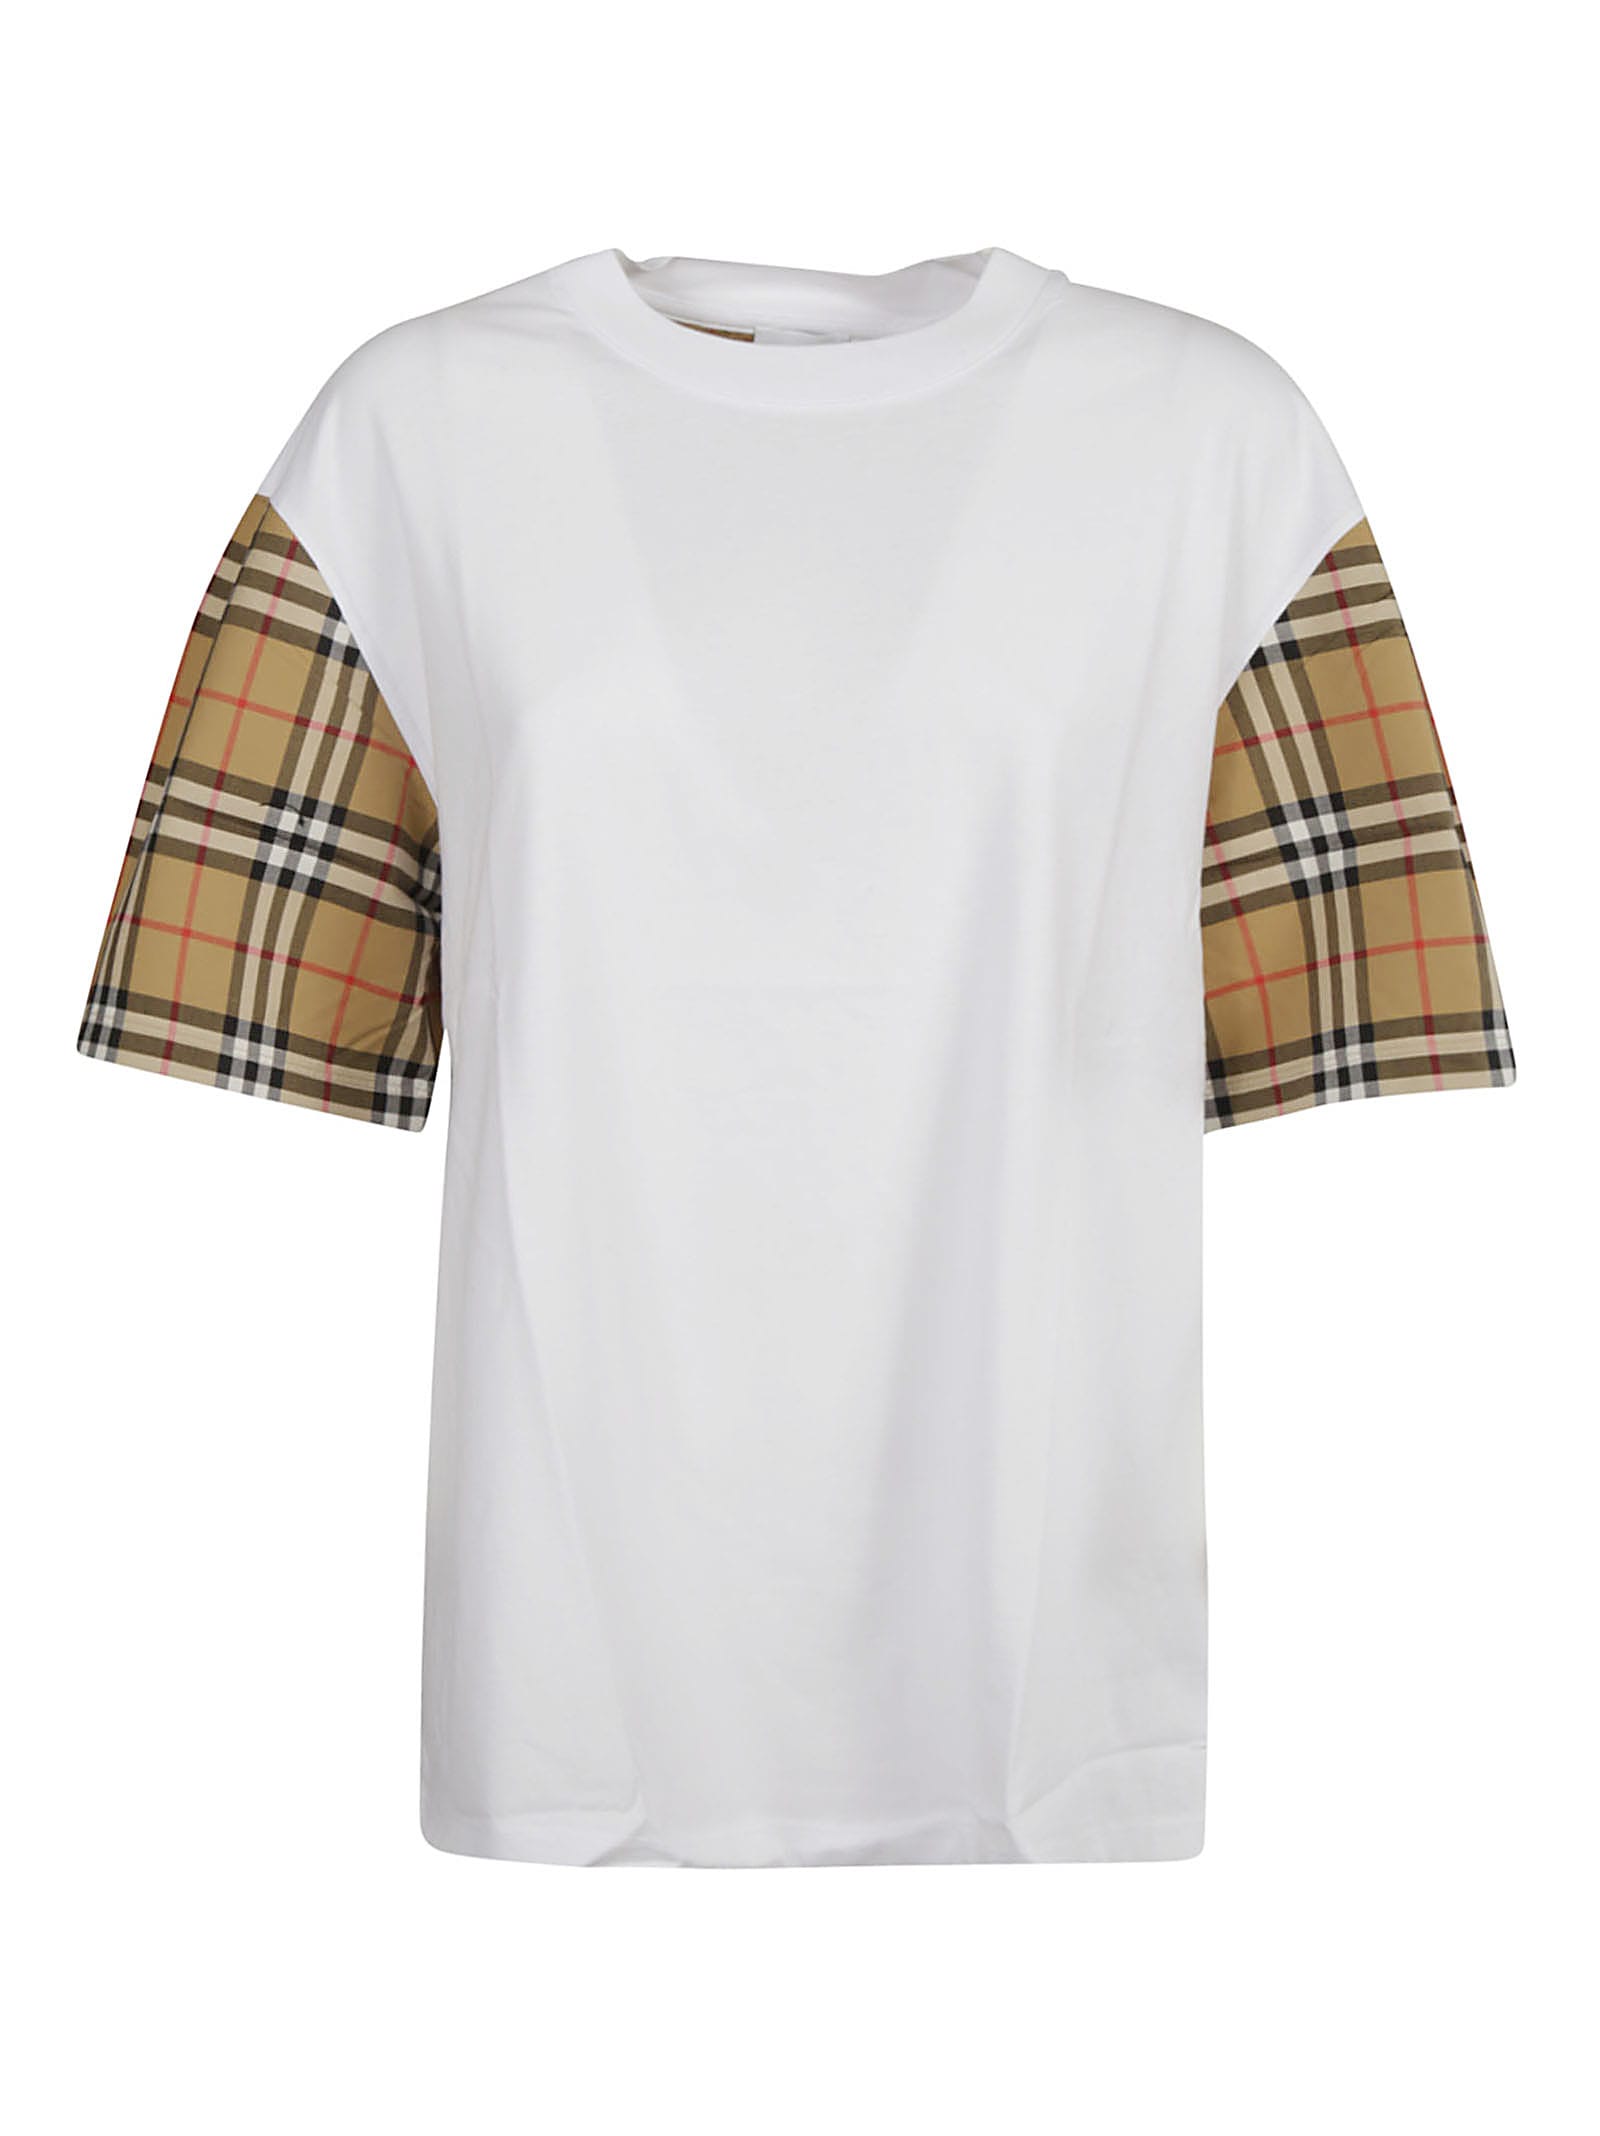 BURBERRY CHECKED SLEEVE T-SHIRT,11521988